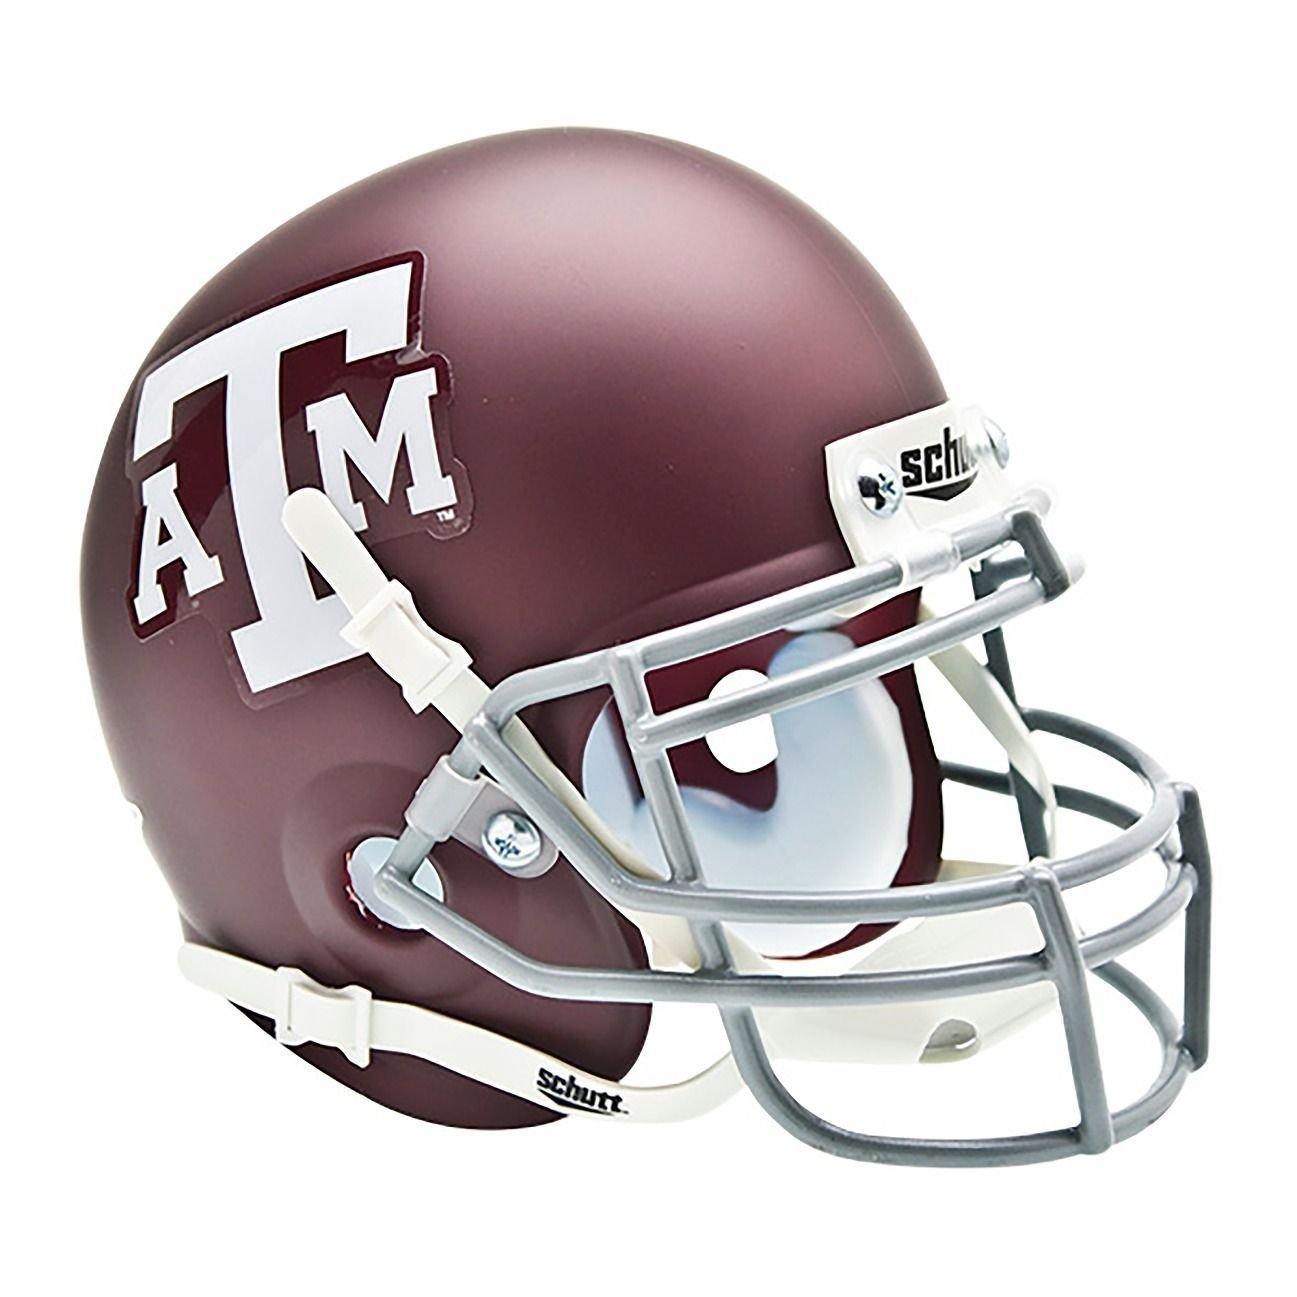 Texas A&M Aggies College Football Collectible Schutt Mini Helmet - Picture Inside - FANZ Collectibles - Fanz Collectibles